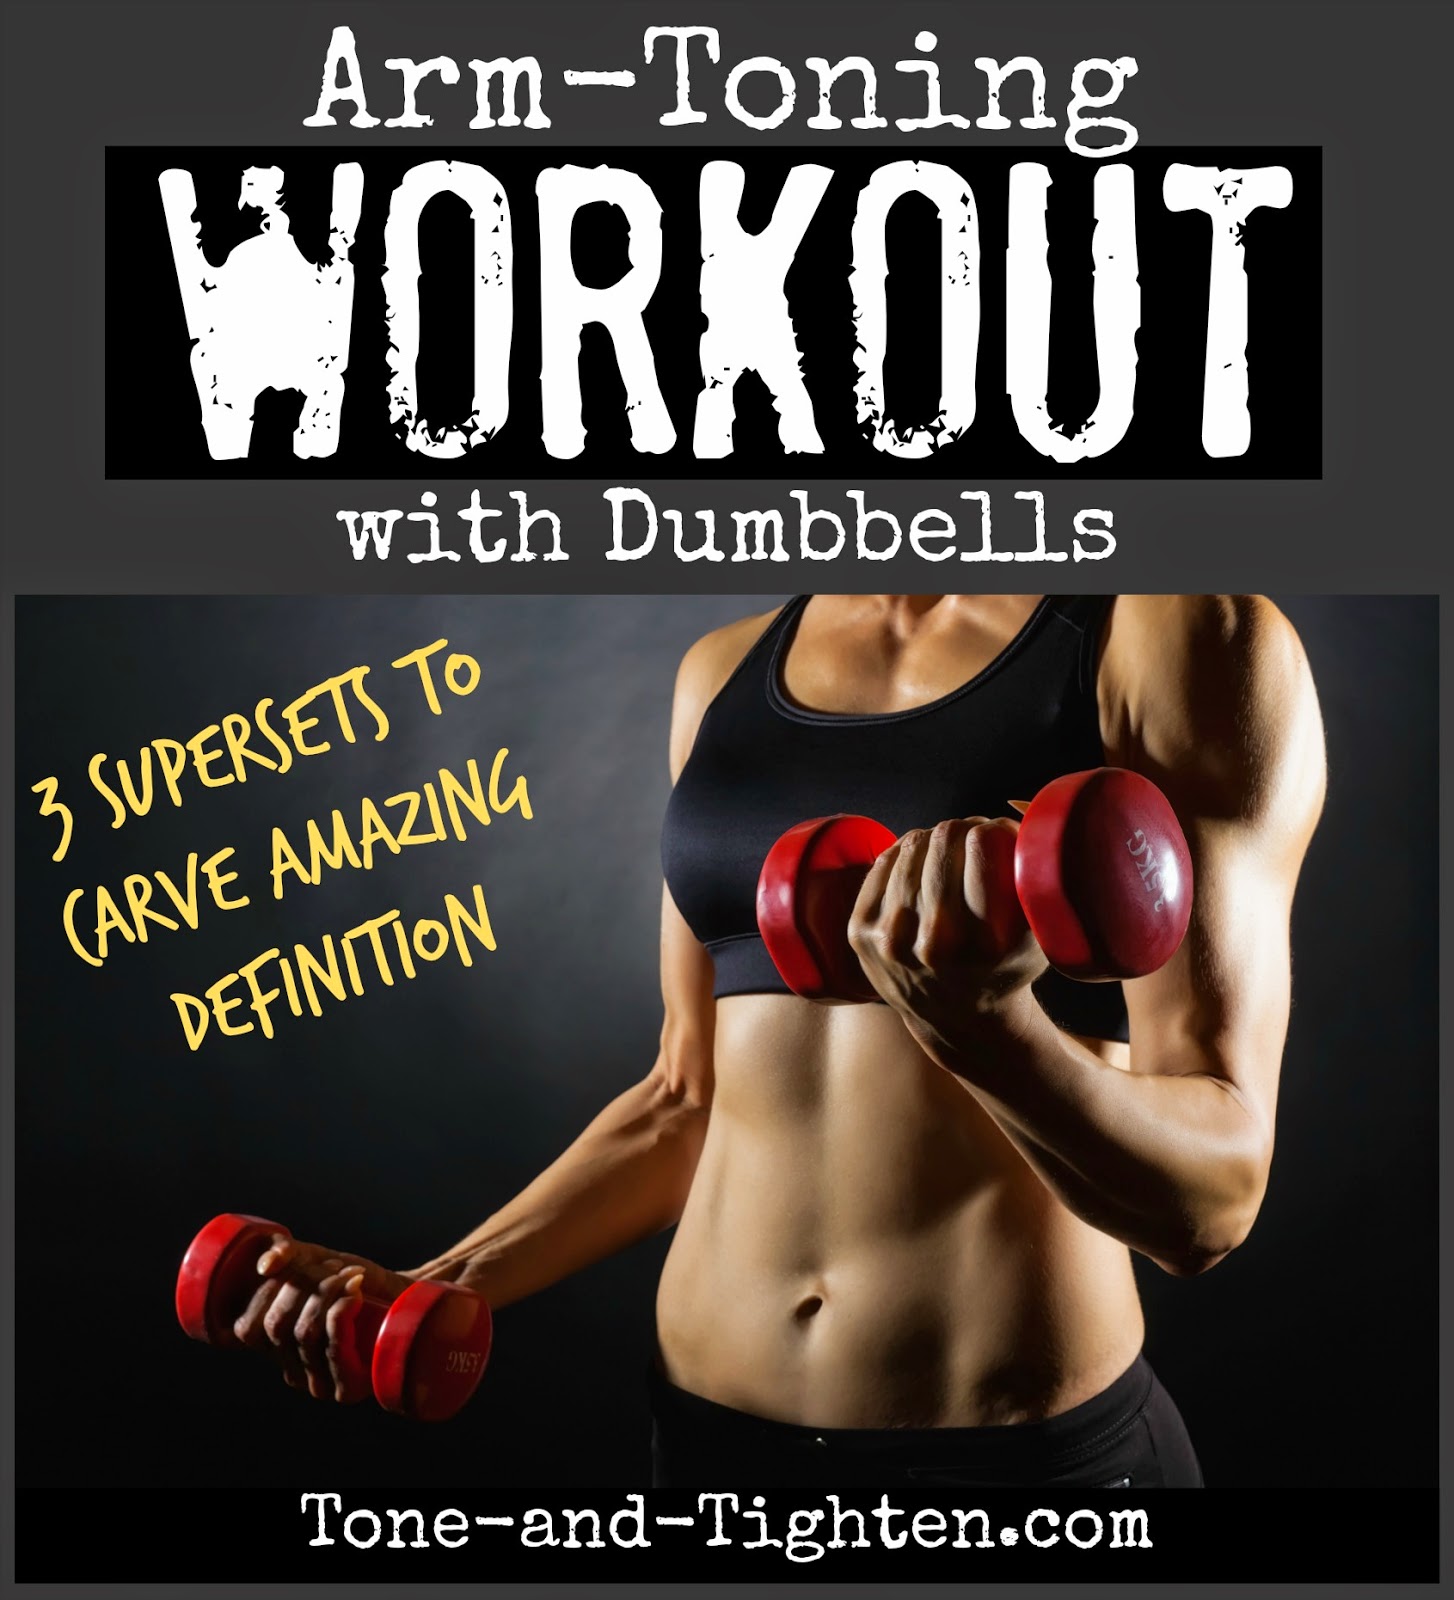 The Best Arm Toning Workout with Dumbbells